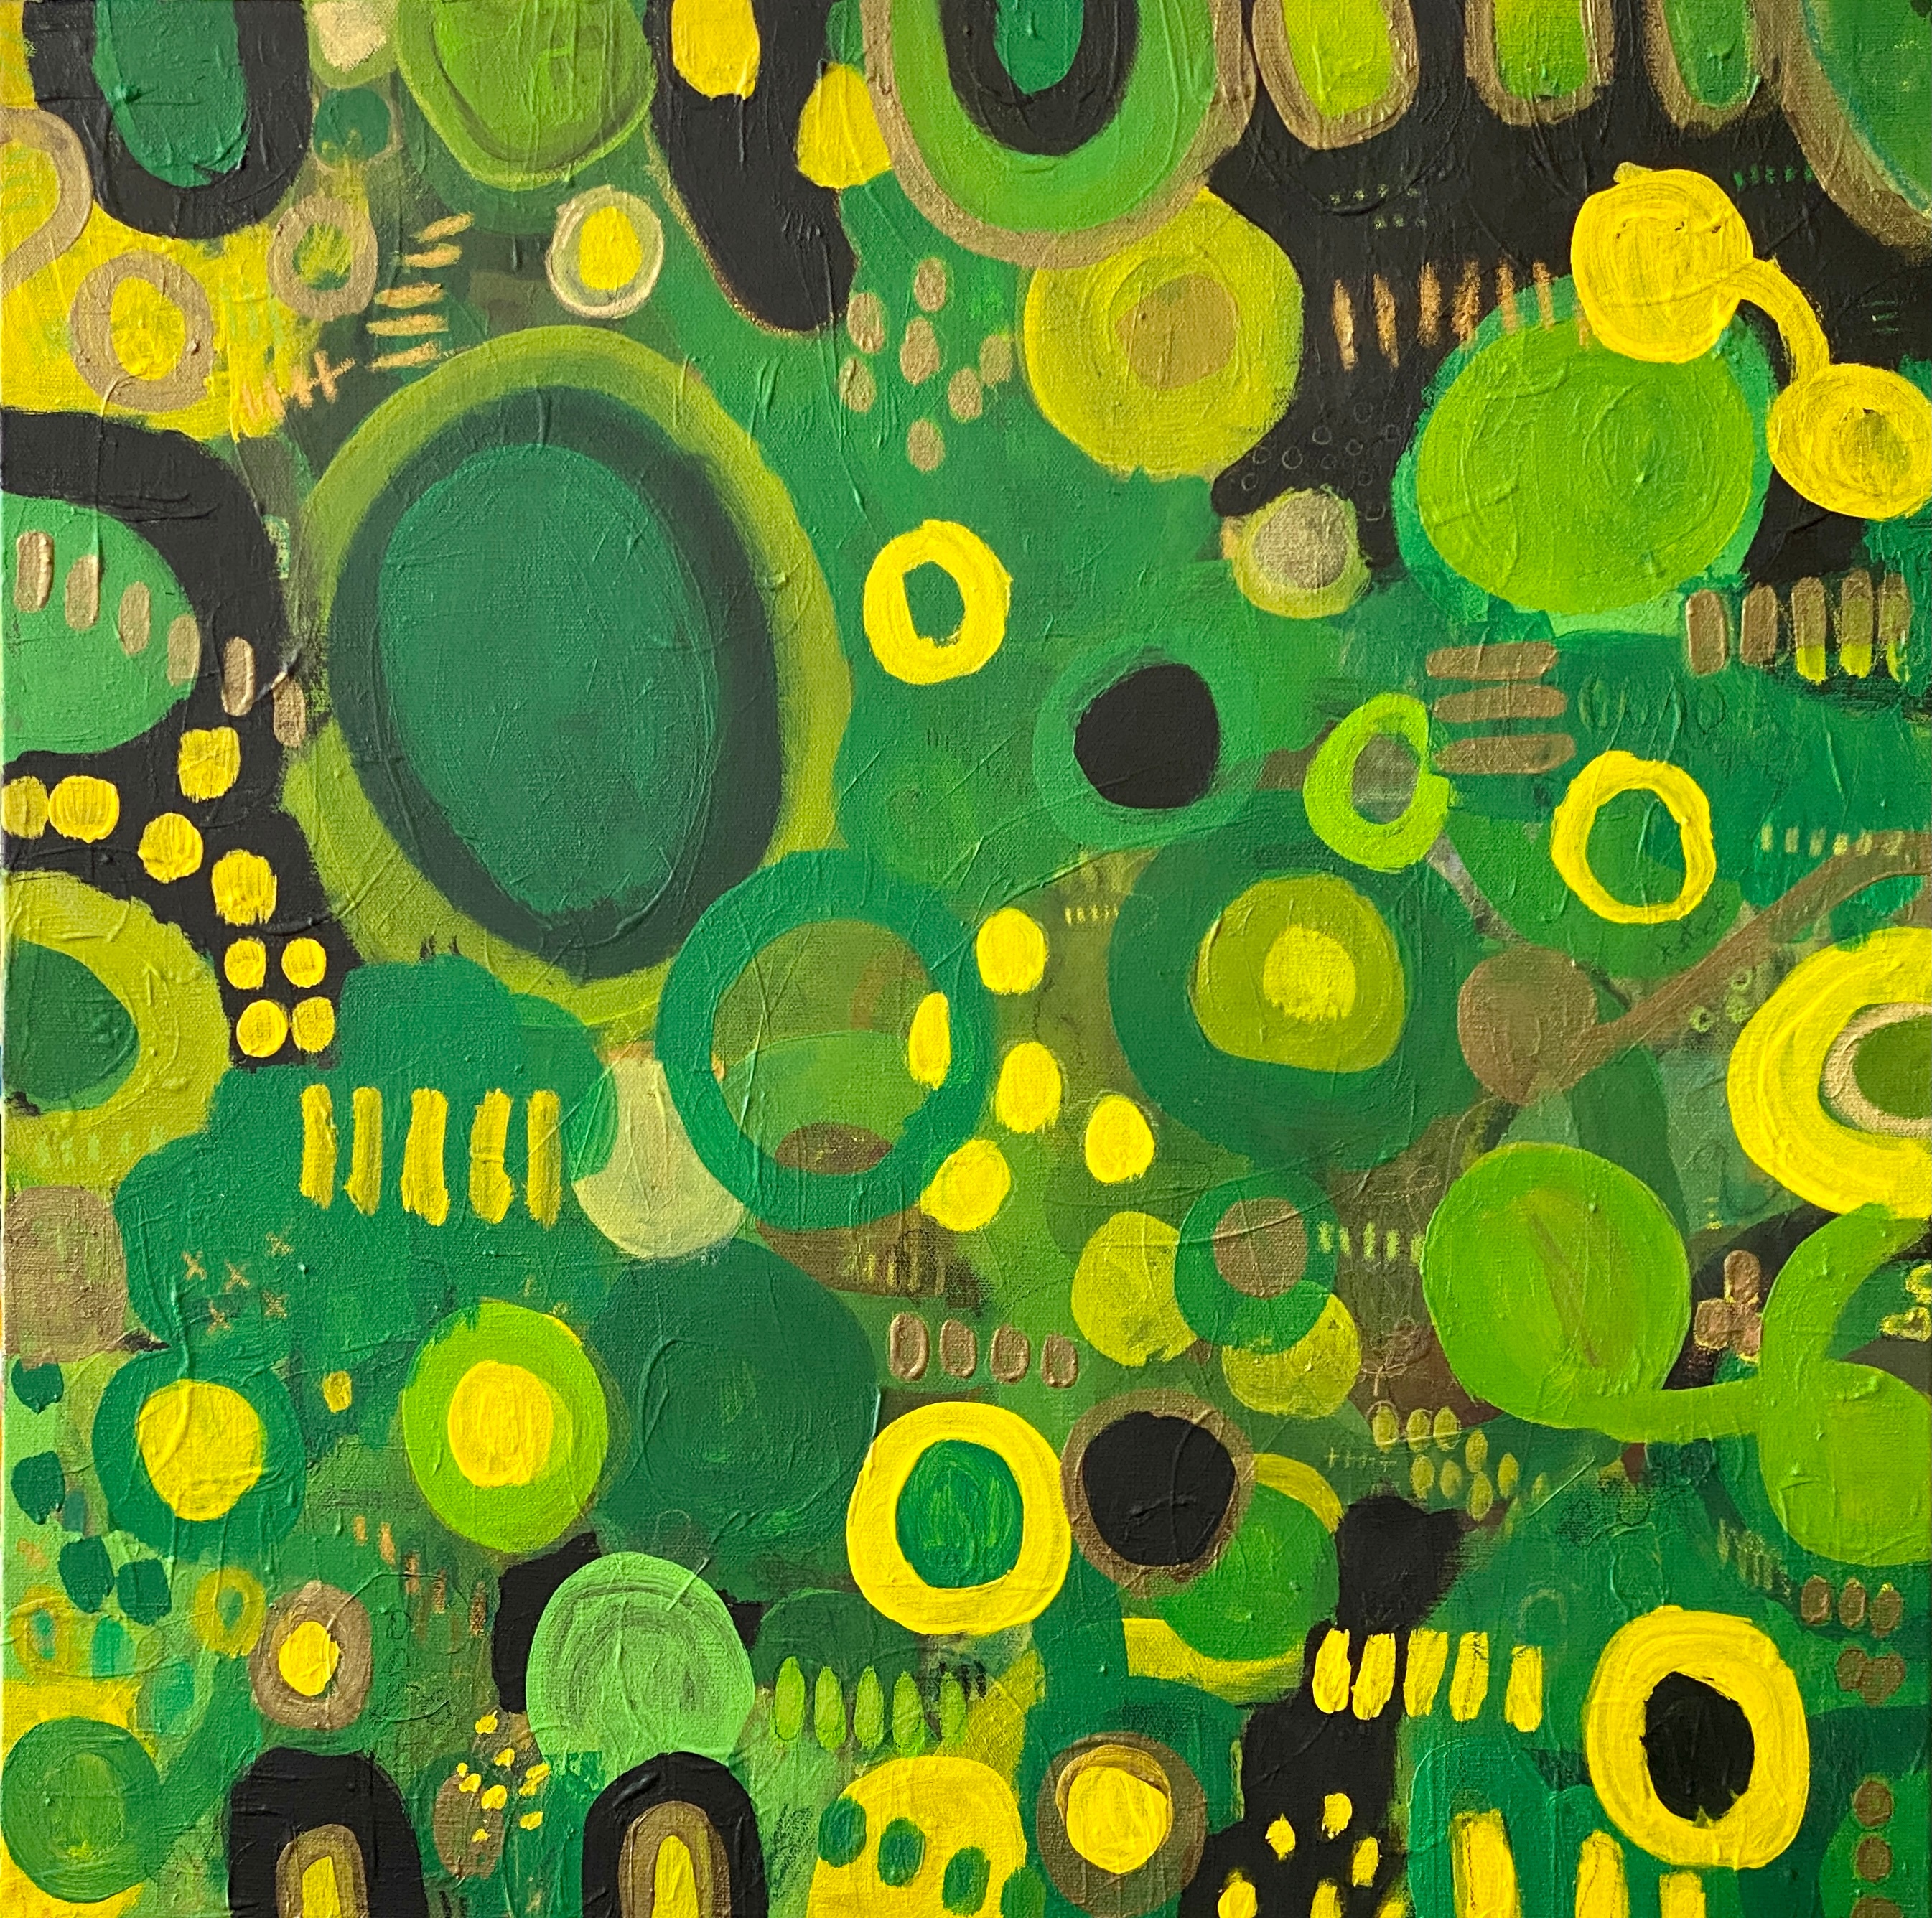 Kiwi mojito   brenden spivey   abstraction gallery s6r2yd